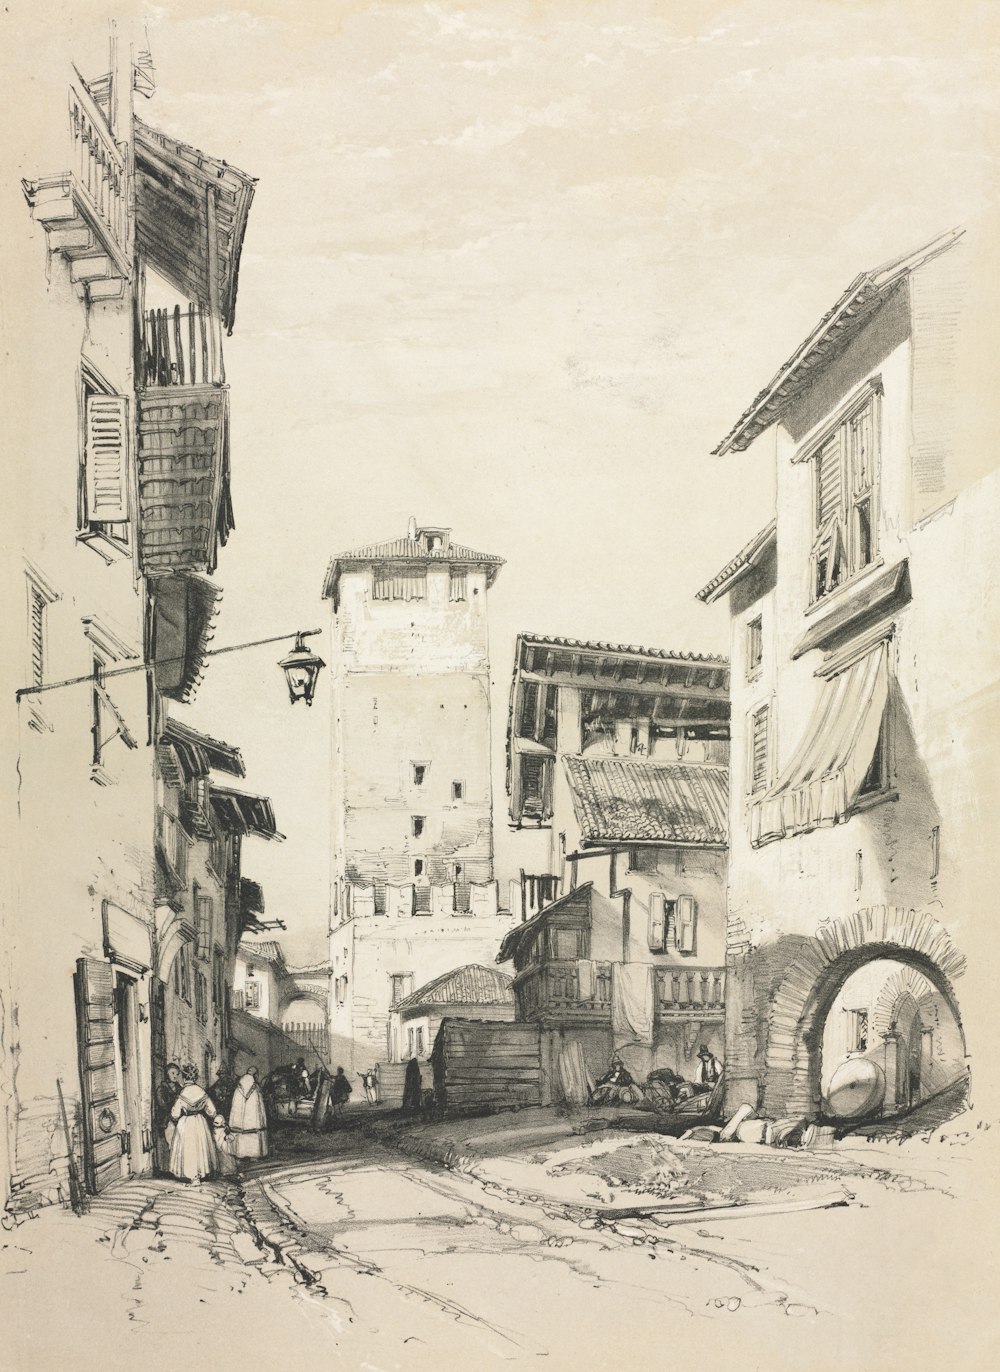 a drawing of a city street with buildings